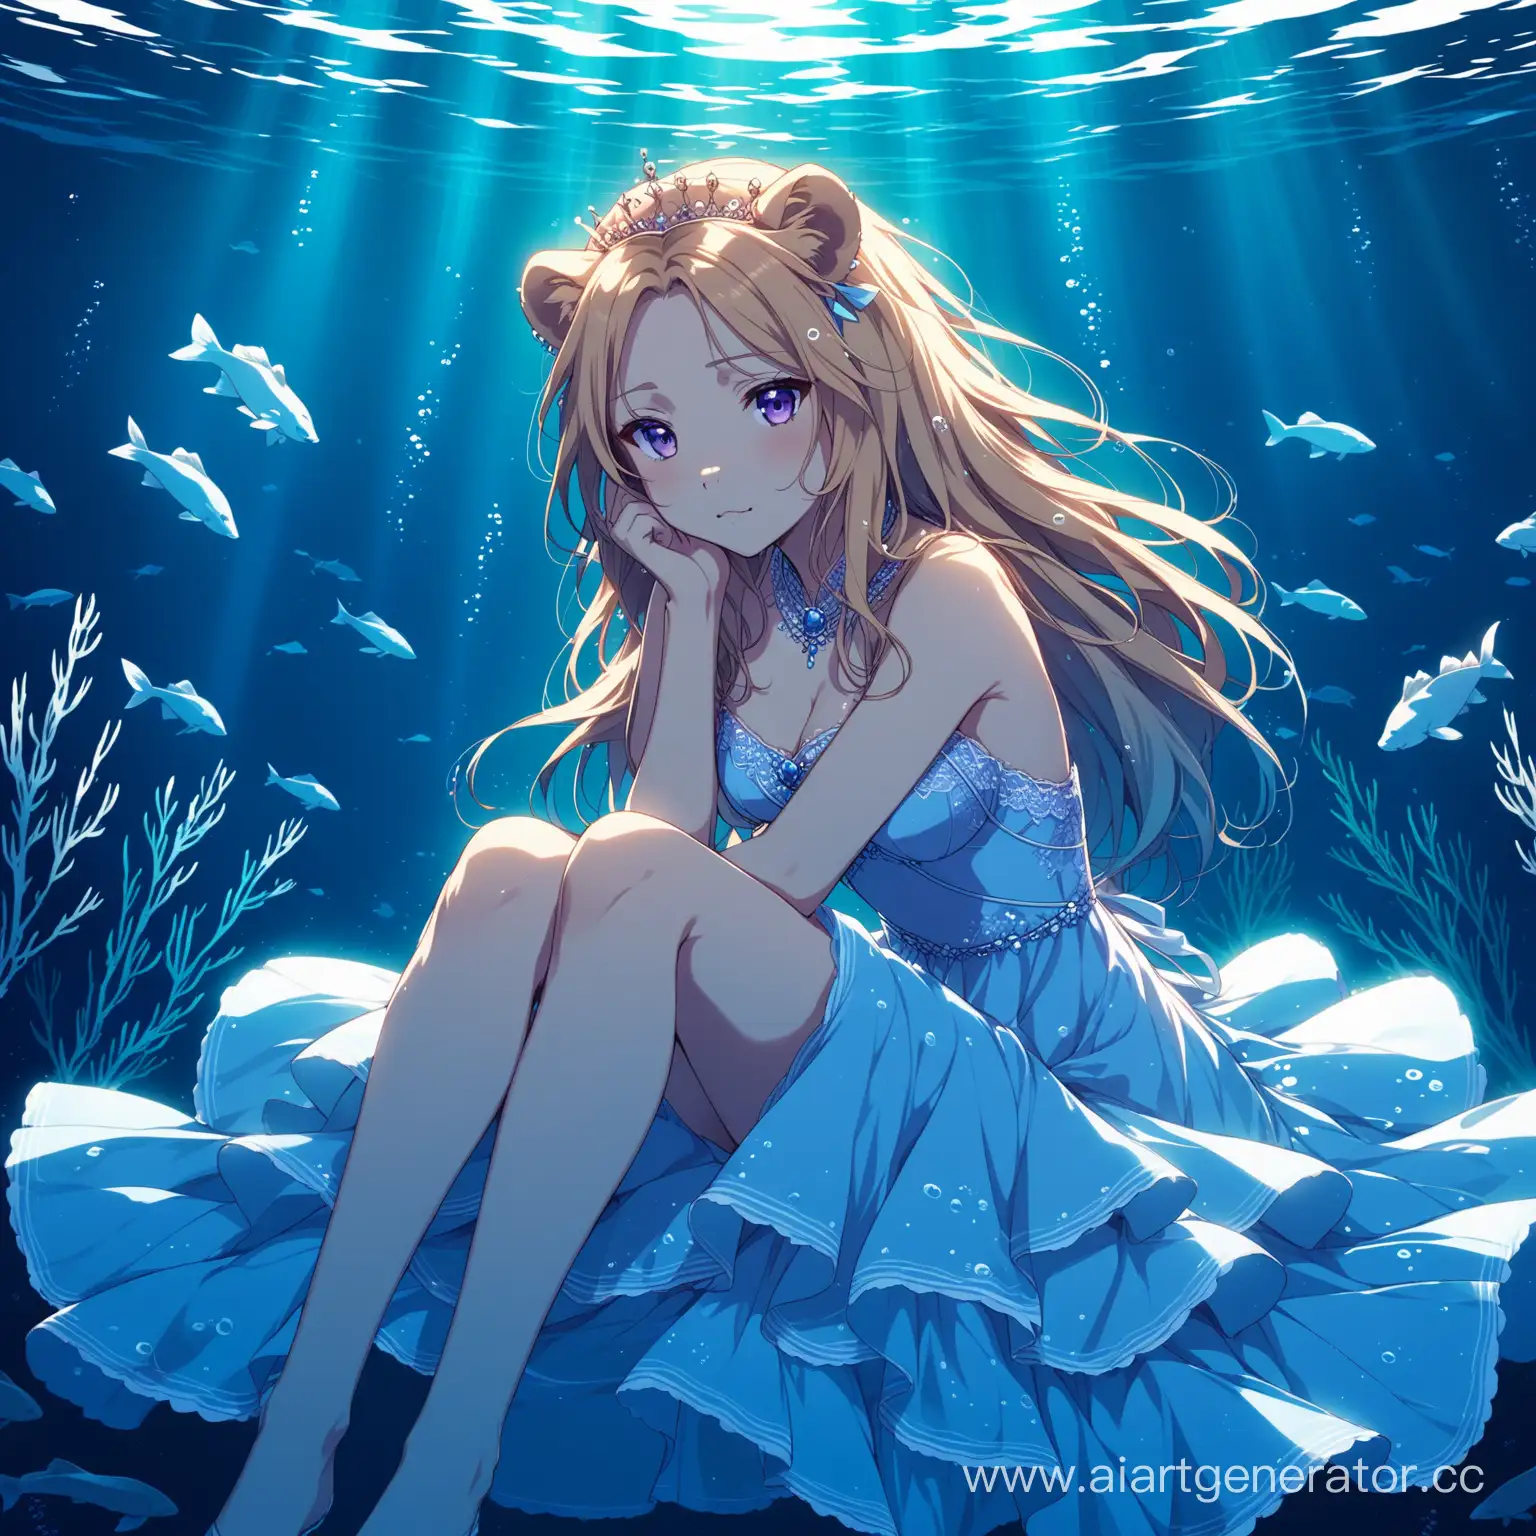 Elegant-Anime-Lioness-in-Dress-Sitting-Underwater-Amidst-Purple-and-Blue-Hues